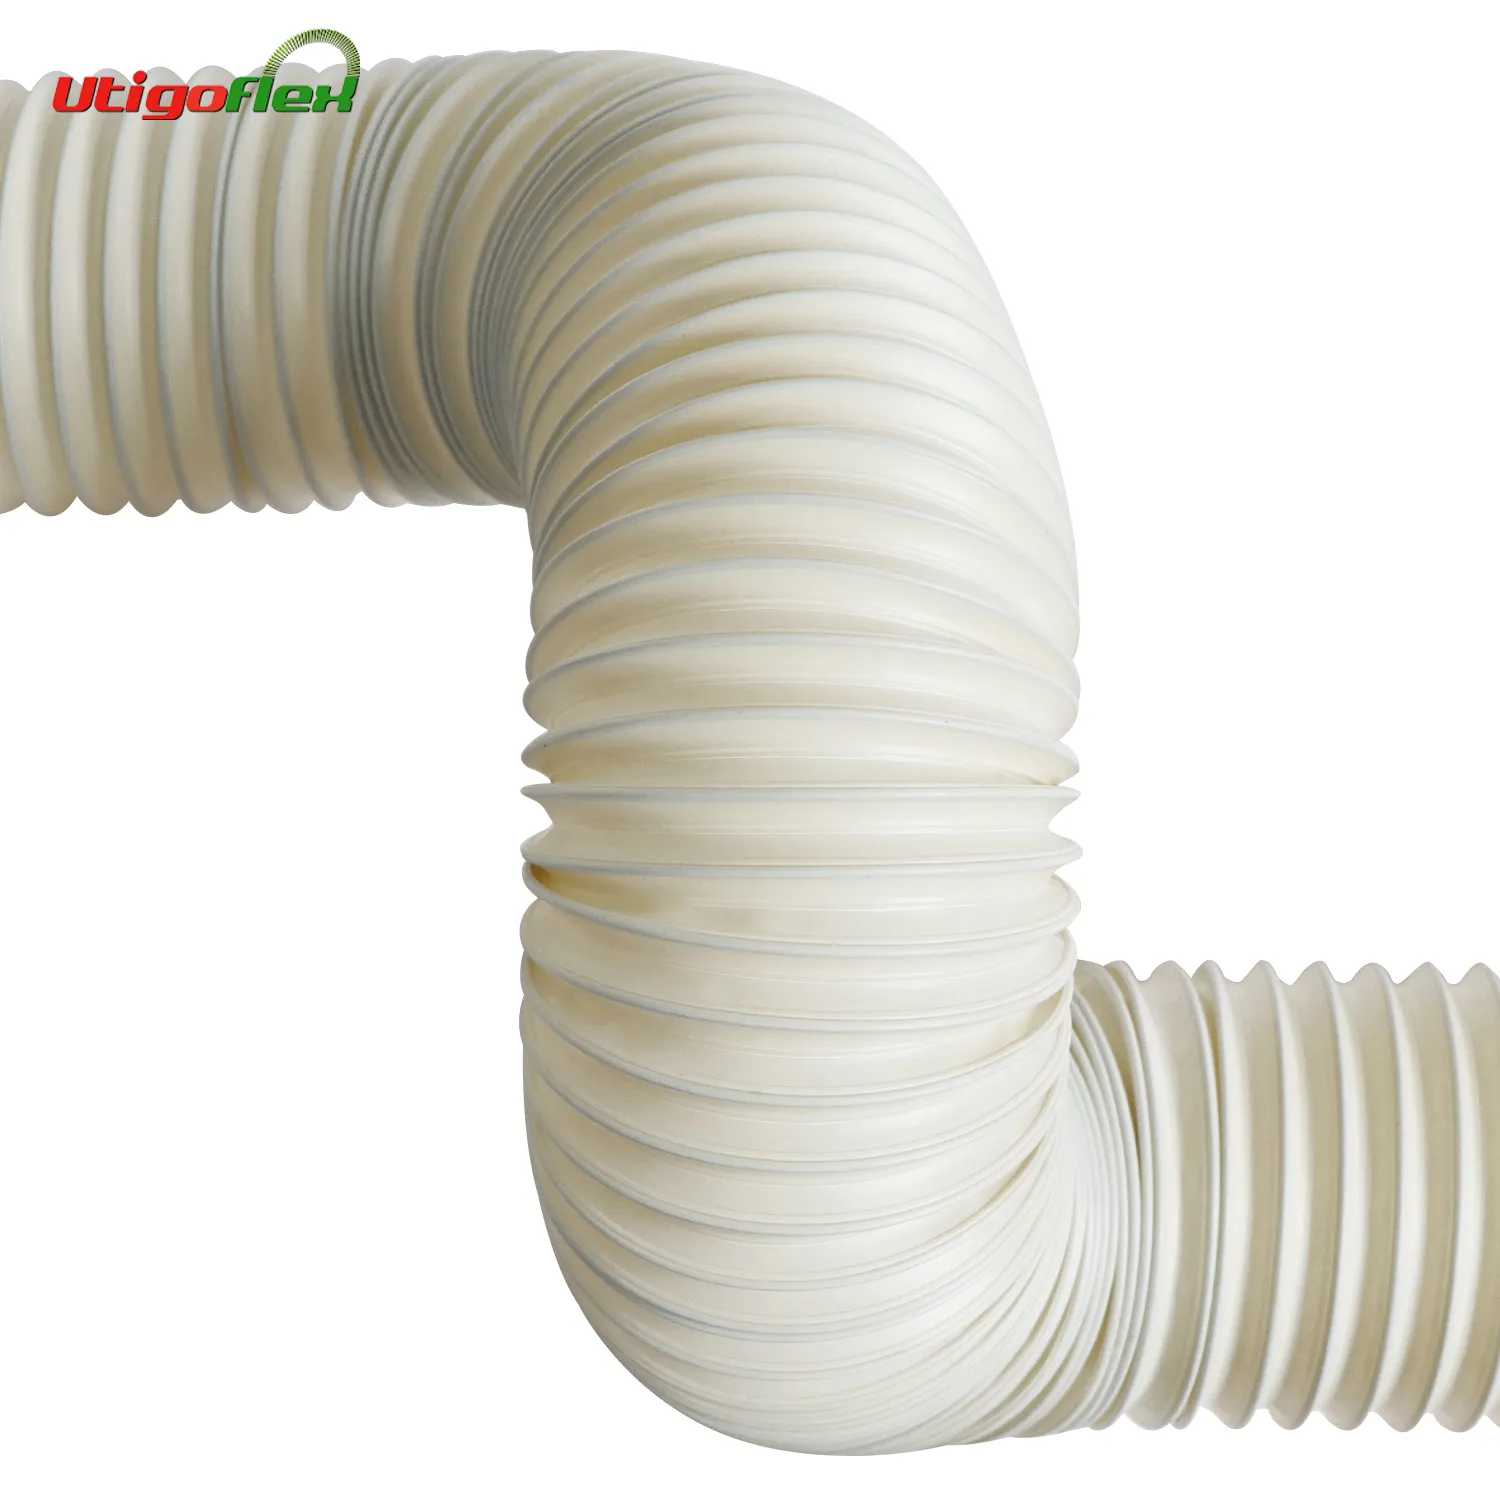 Highly Flexible PP Drain Duct Compressible PP Water Drain Hose Pipe